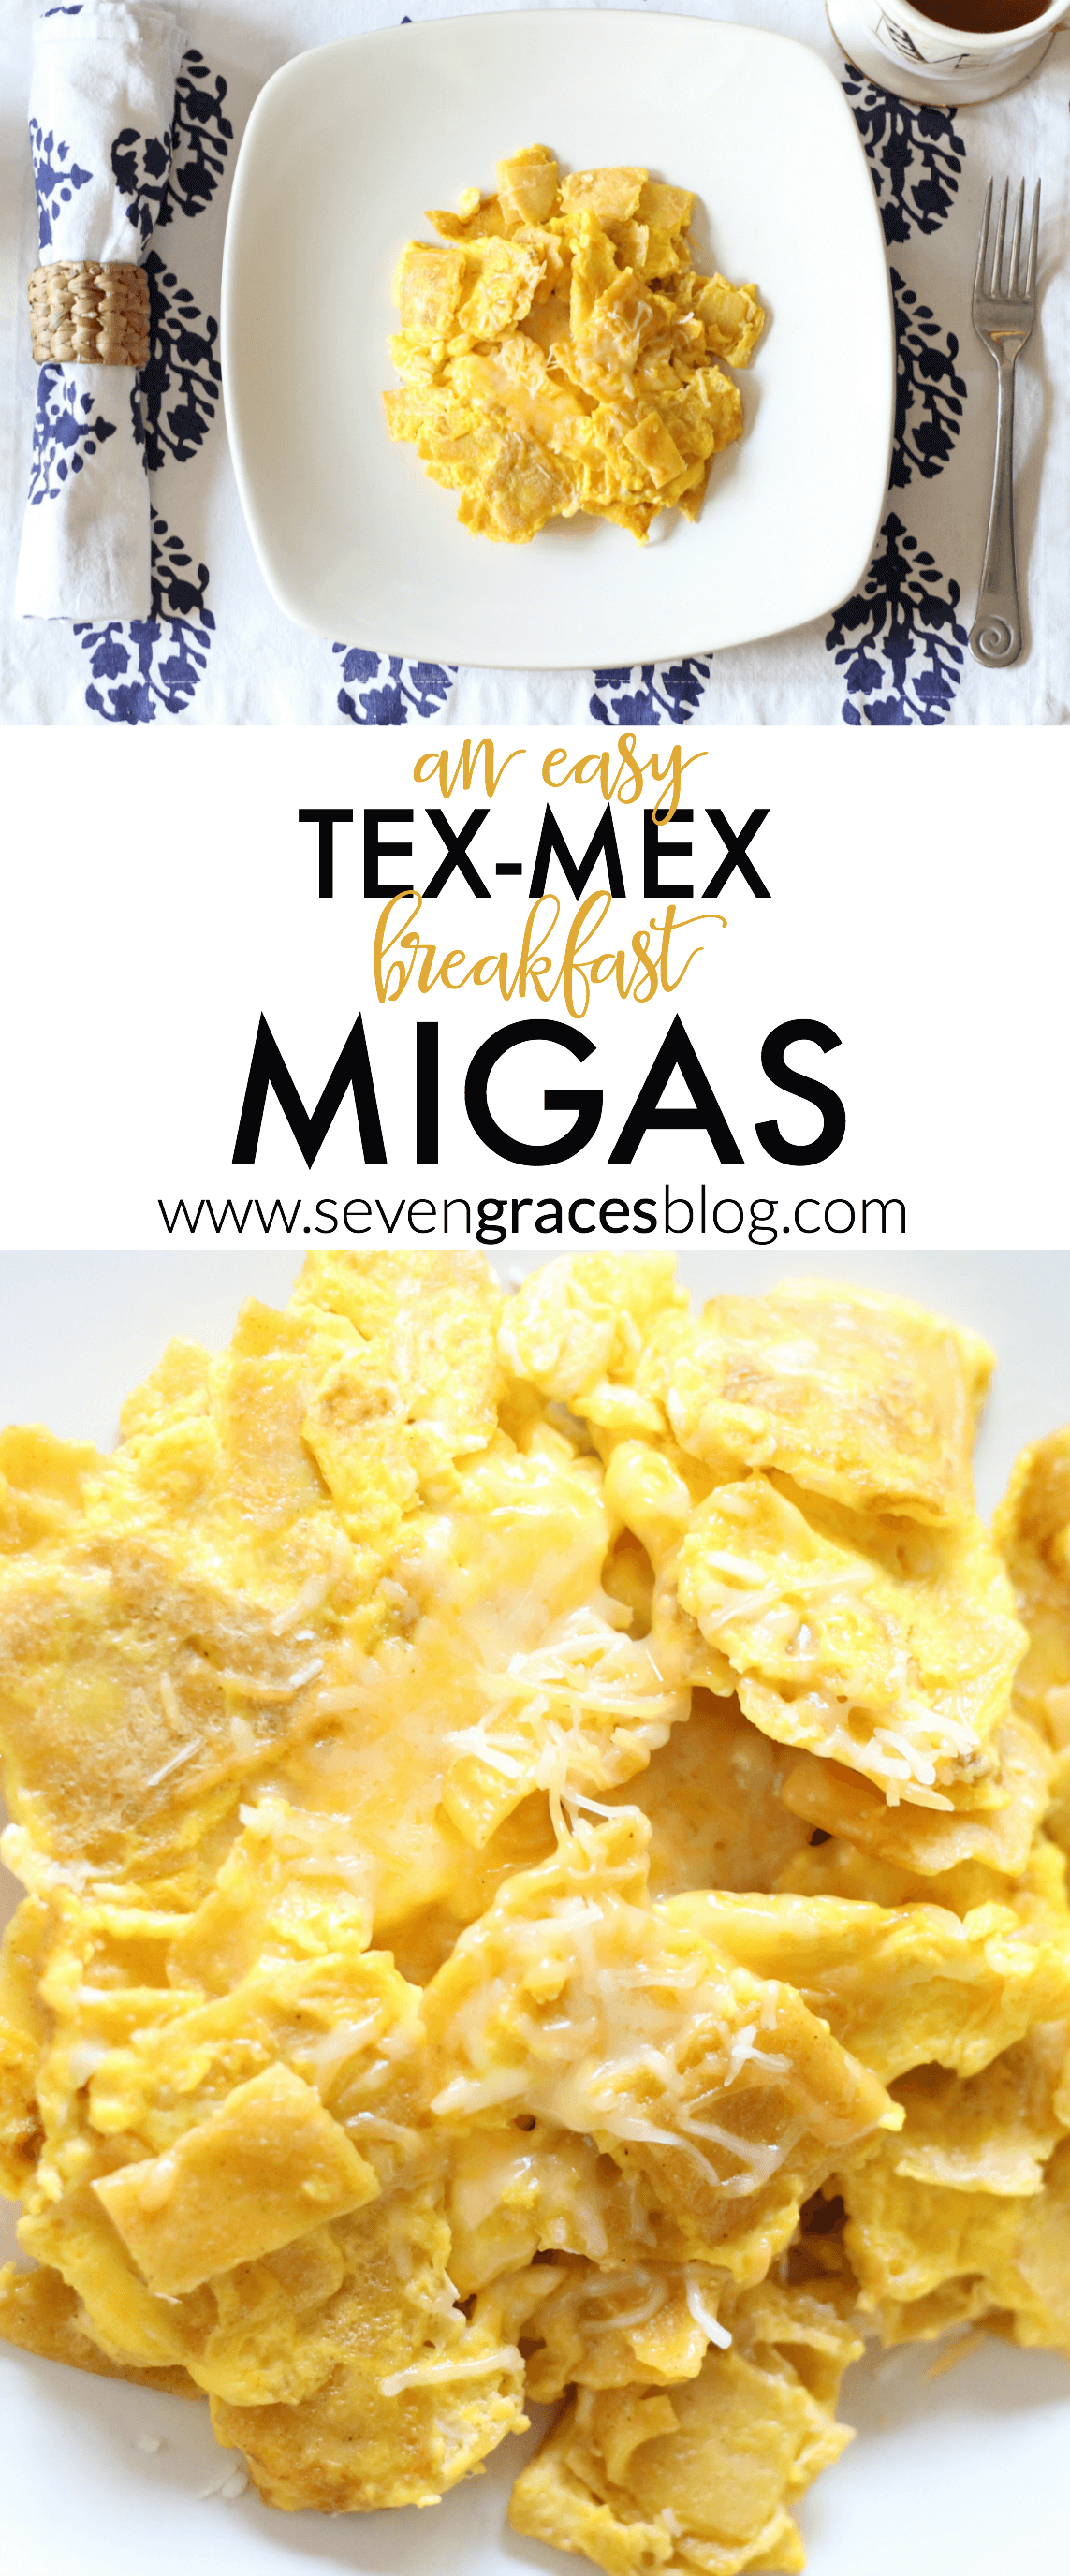 An Tex-Mex breakfast. These migas are so good. They're quick, easy, and delicious! Just add salsa or your favorite bell peppers, onions, tomatoes, or jalapenos to add your own personal flair, but this will not disappoint the family.